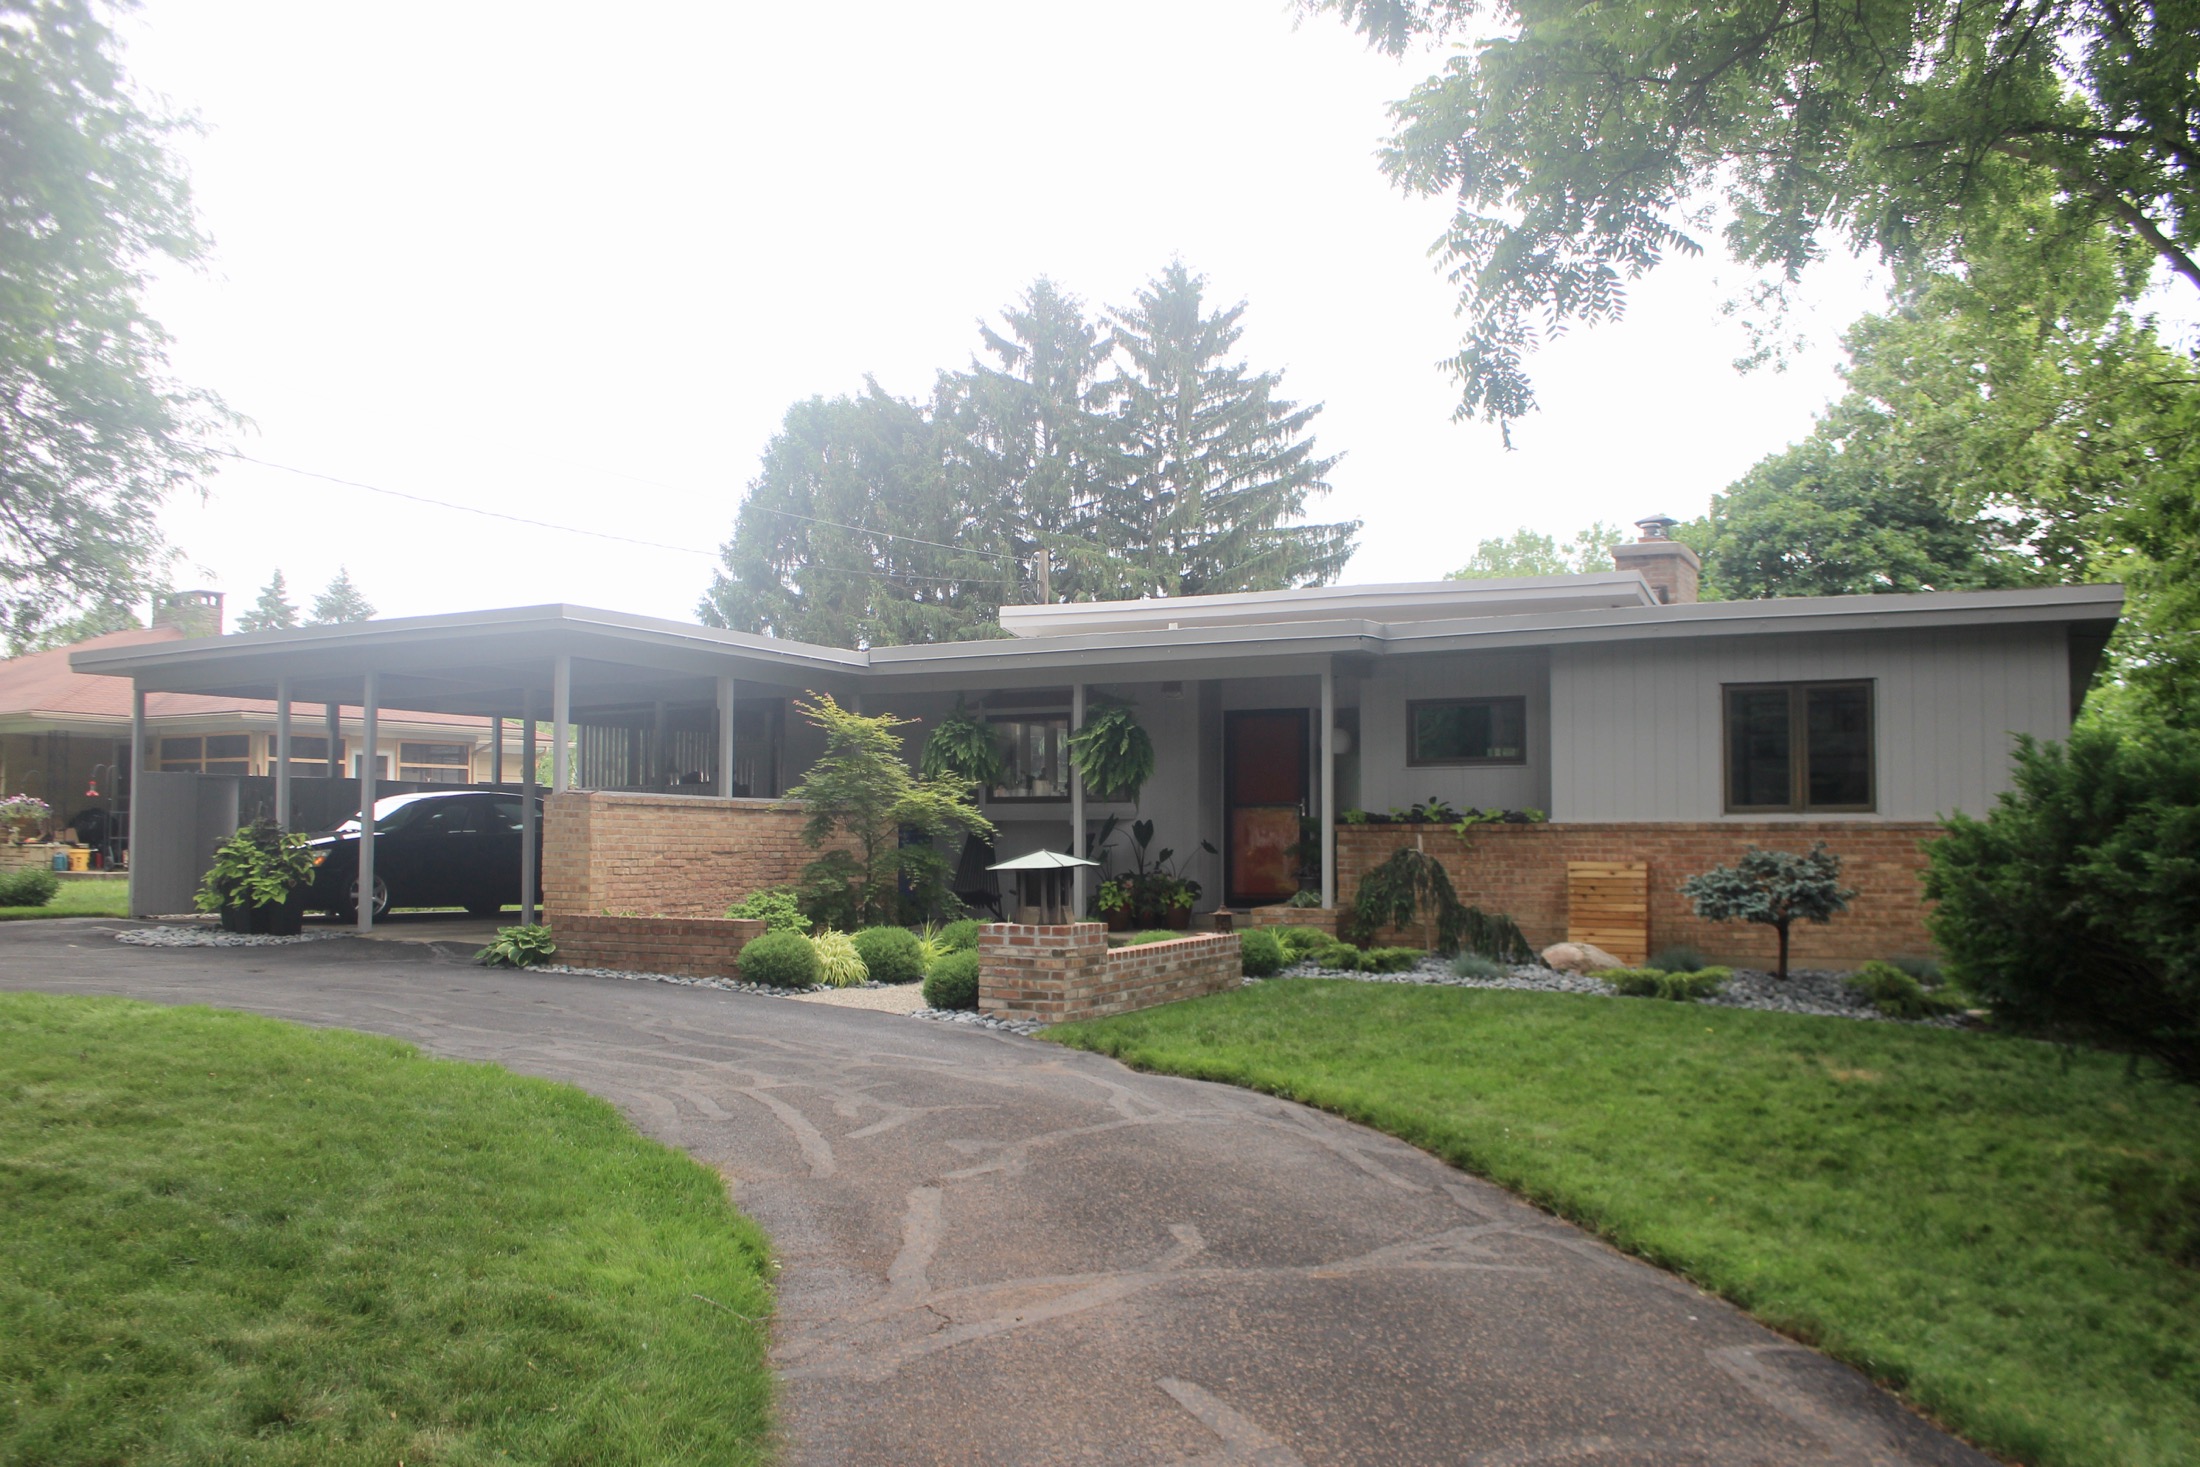 Exterior with view of carport and circular drive